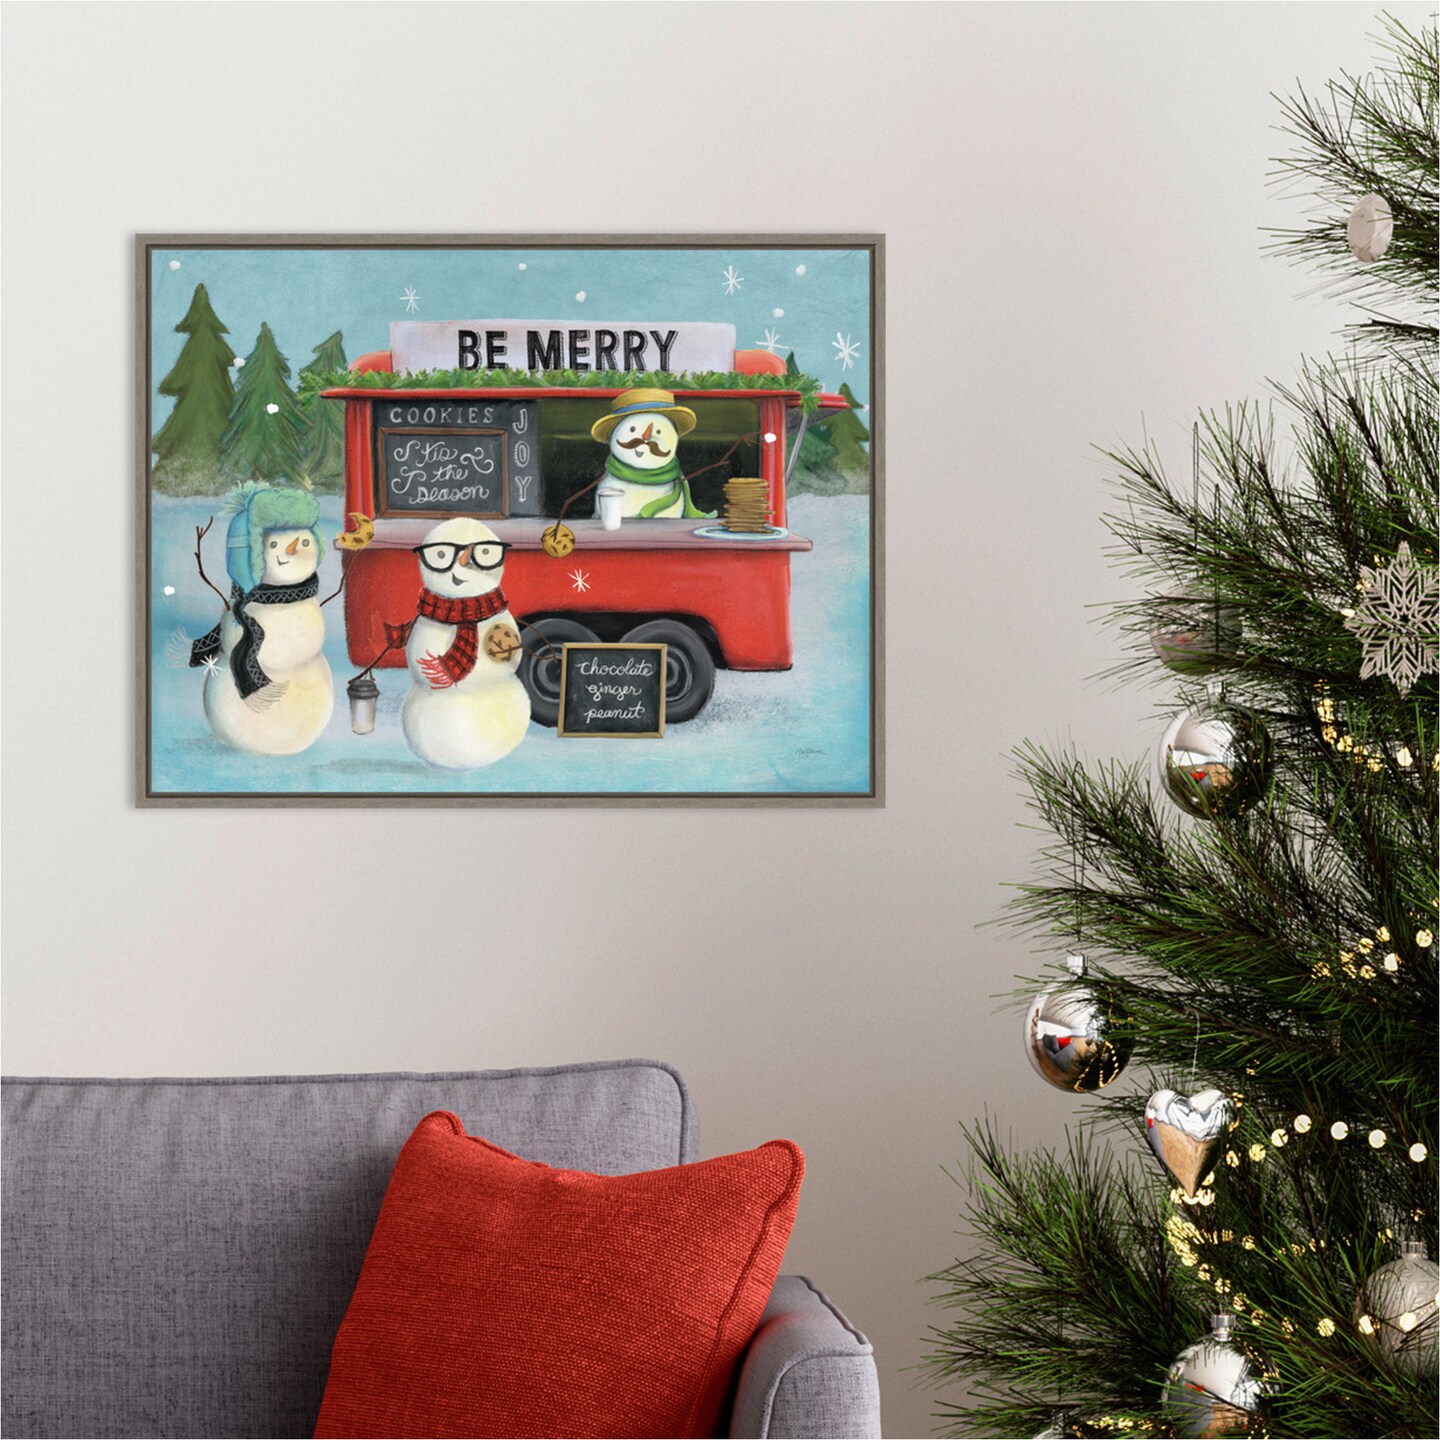 Christmas on wheels III by Mary Urban 24-in. W x 18-in. H. Canvas Wall Art Print Framed in Grey